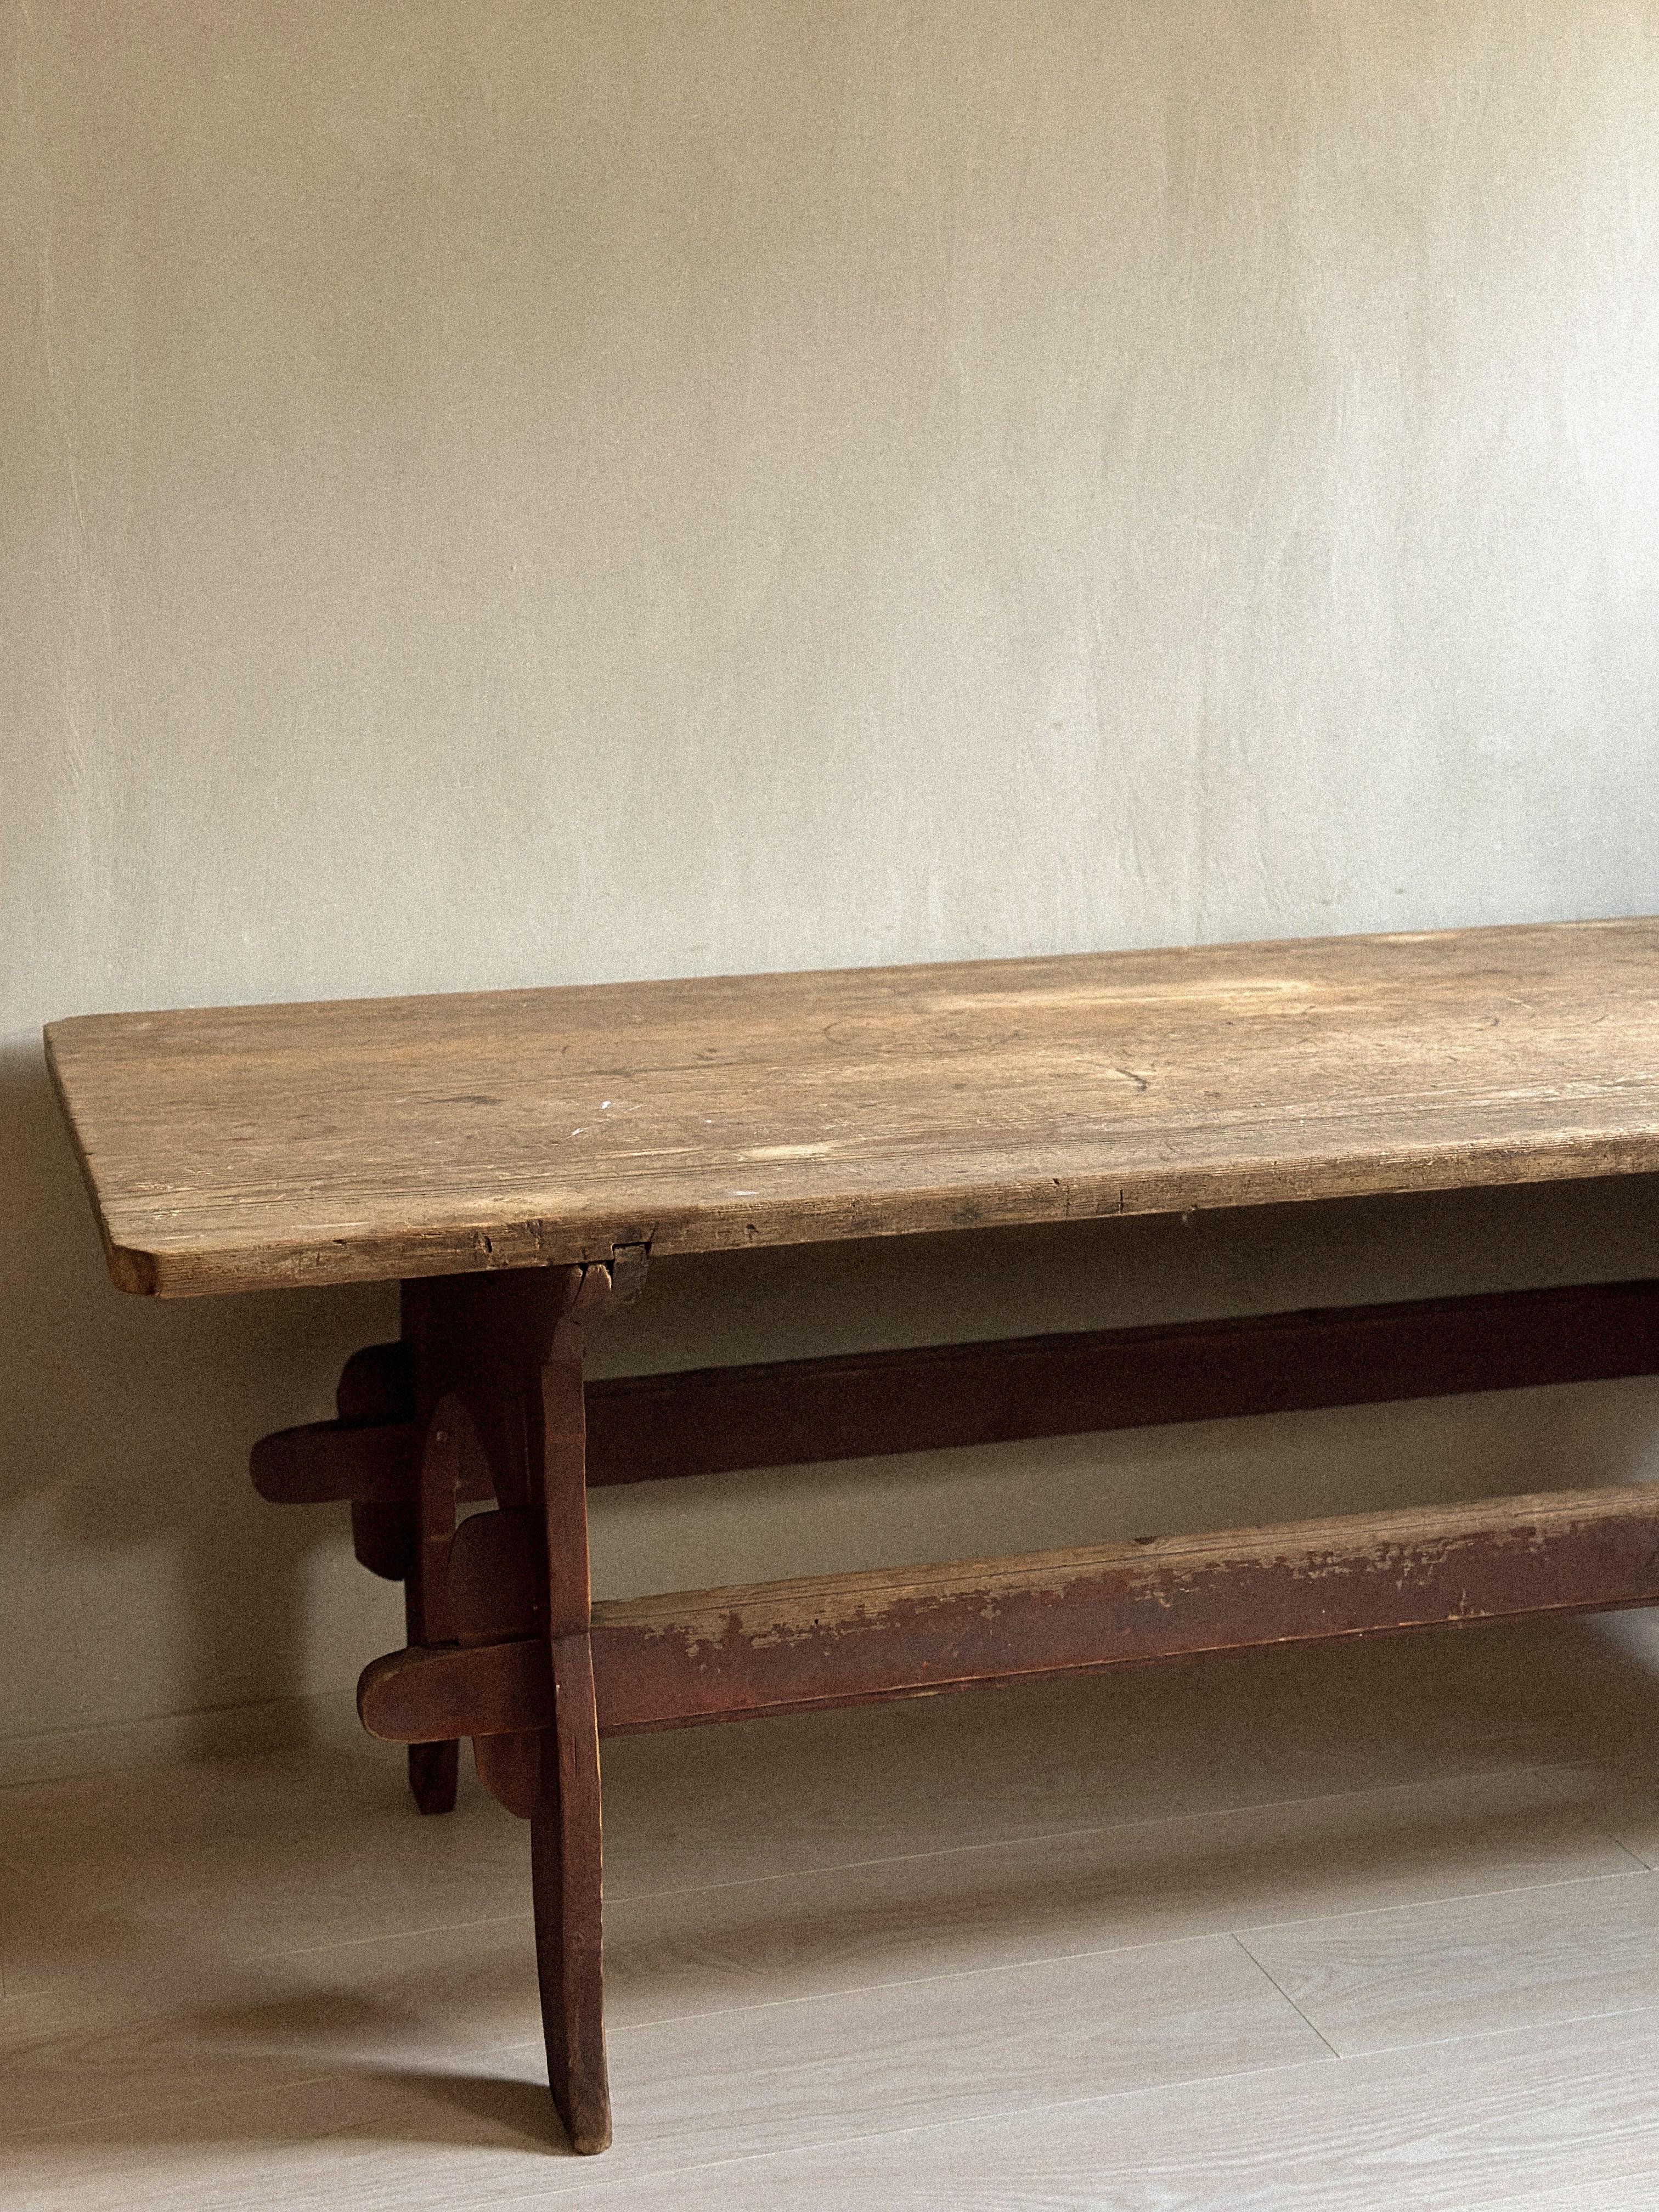 Antique Wabi Sabi Dining Table or Desk, Anonymous, Scandinavia c. 1800s  For Sale 1